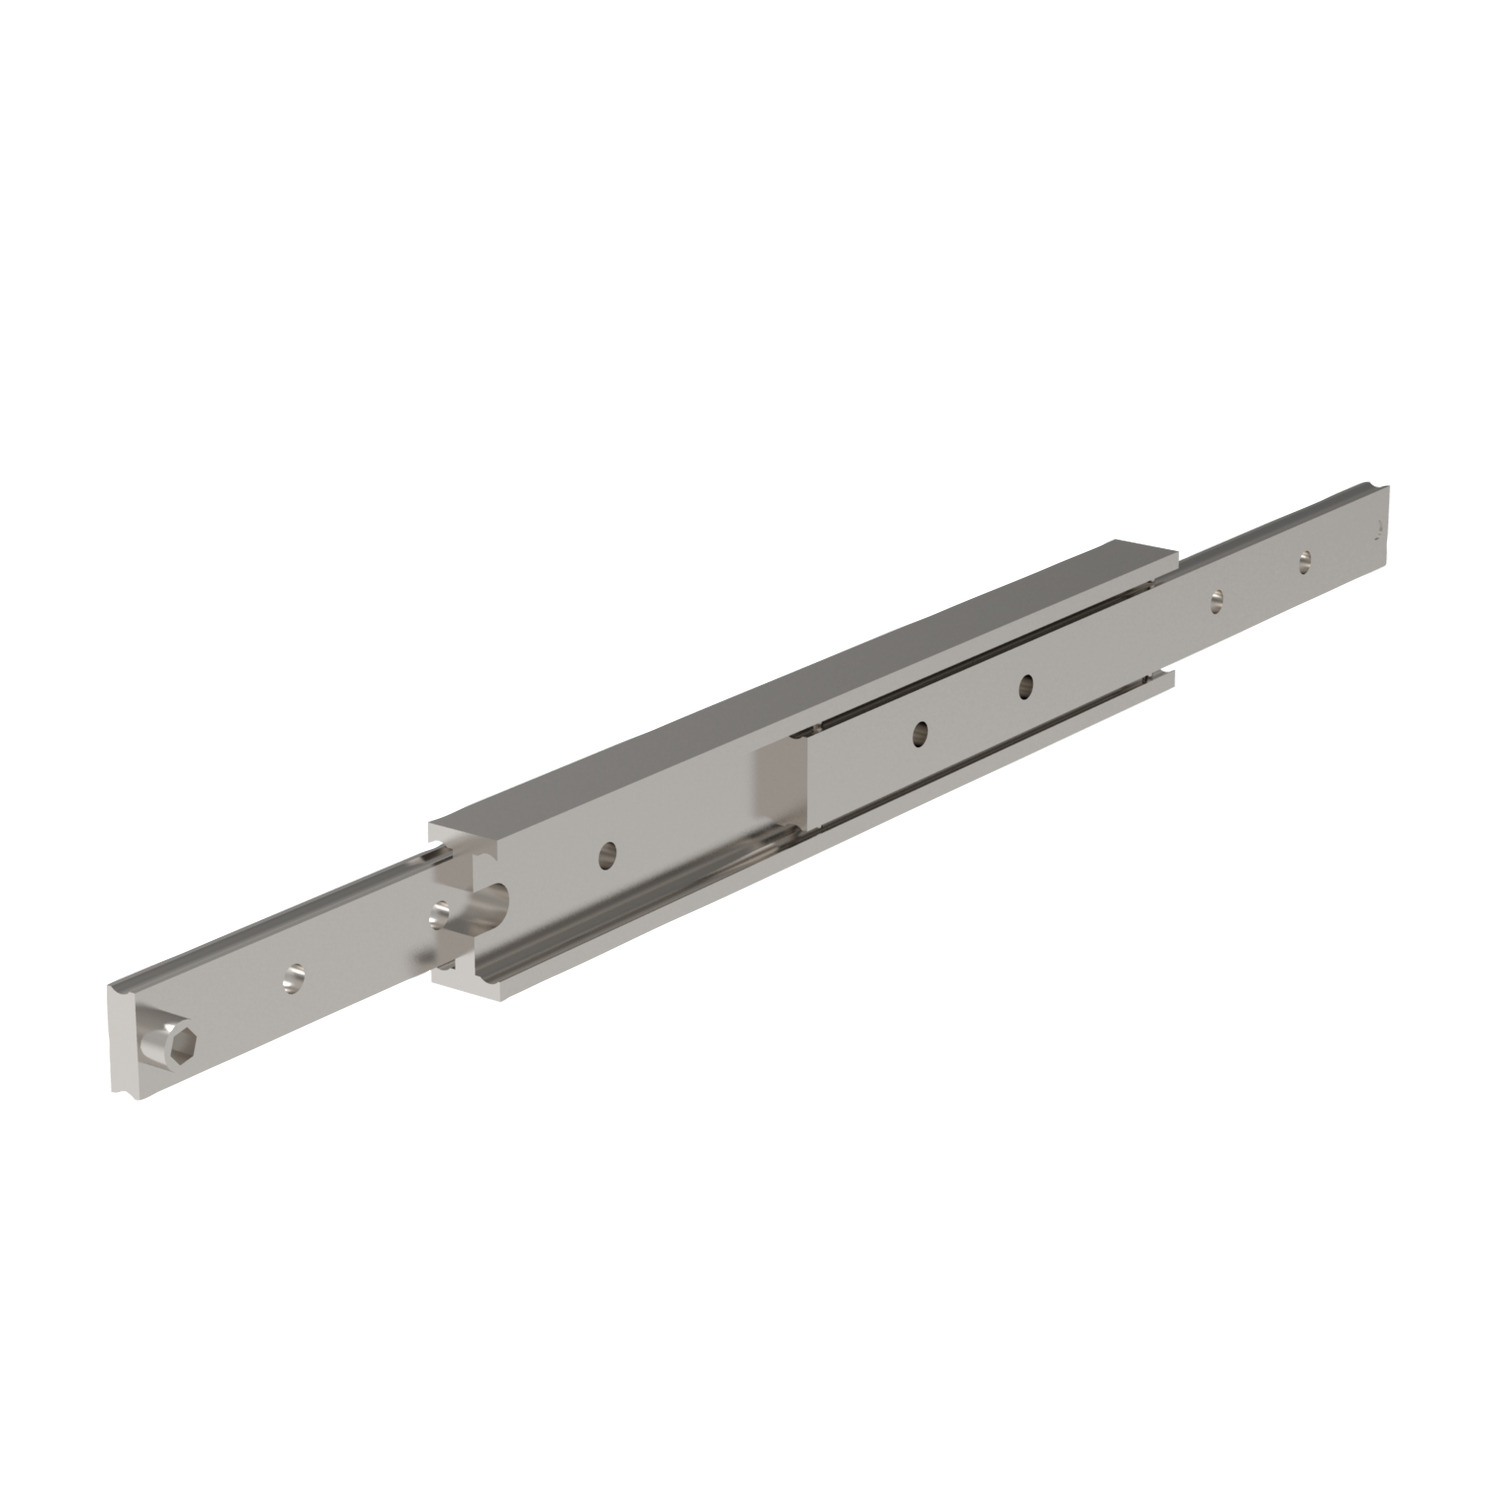 L2052.0200 Stainless AISI 316 slide l 200 size 50 Stainless steel (A4,AISI 316) -rail , balls & cage